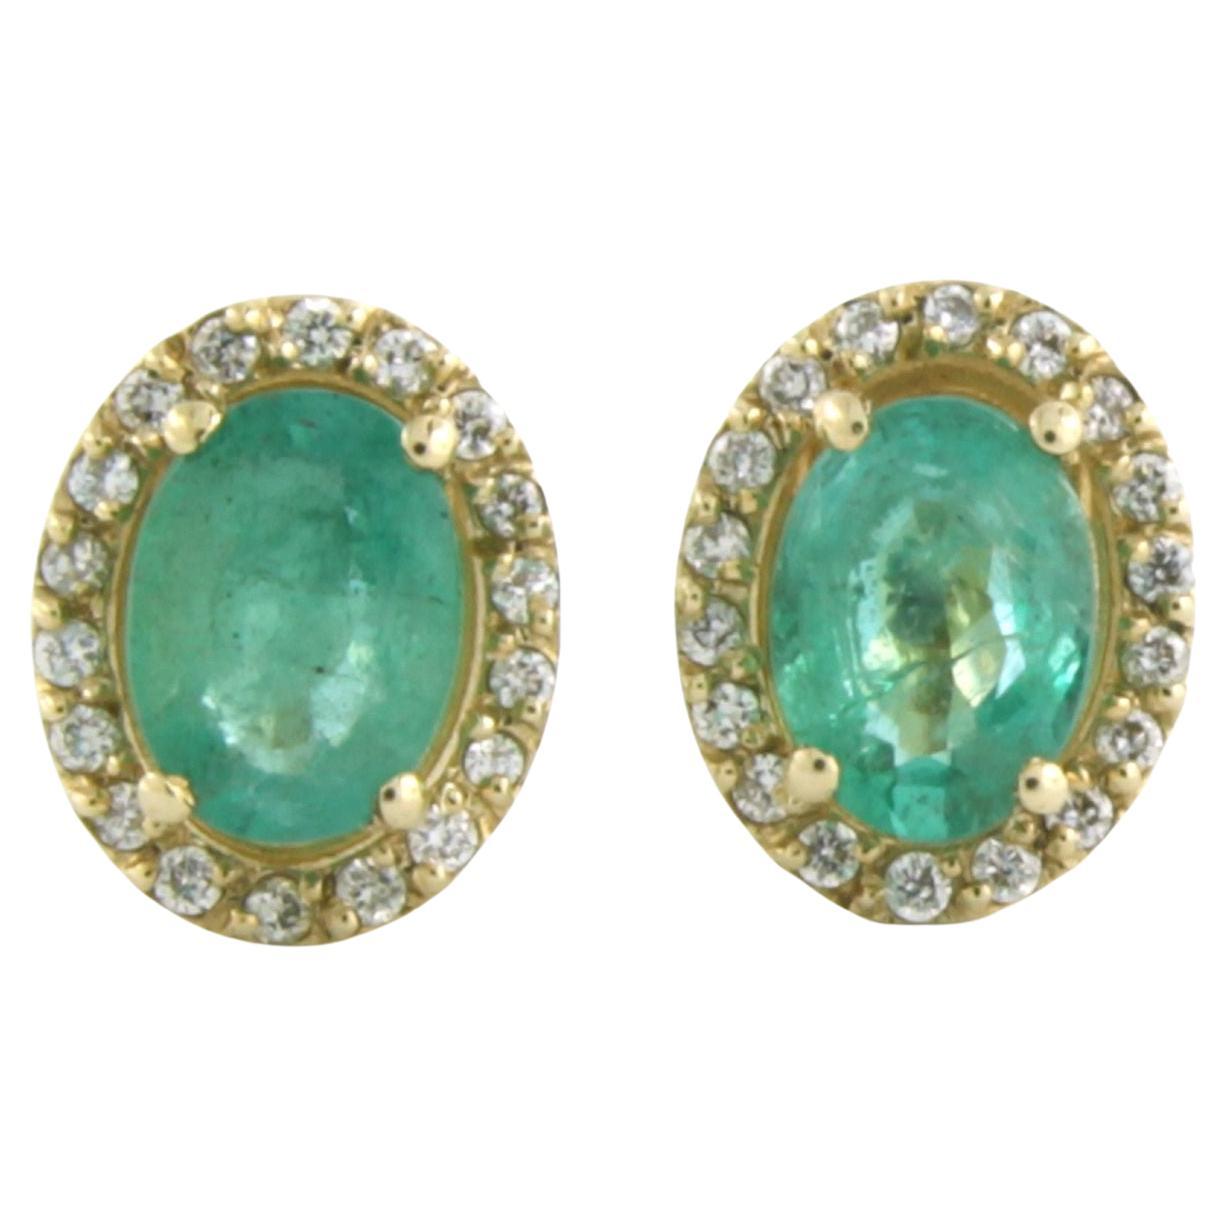 Cluster Earrings set with Emerald and diamonds 14k yellow gold